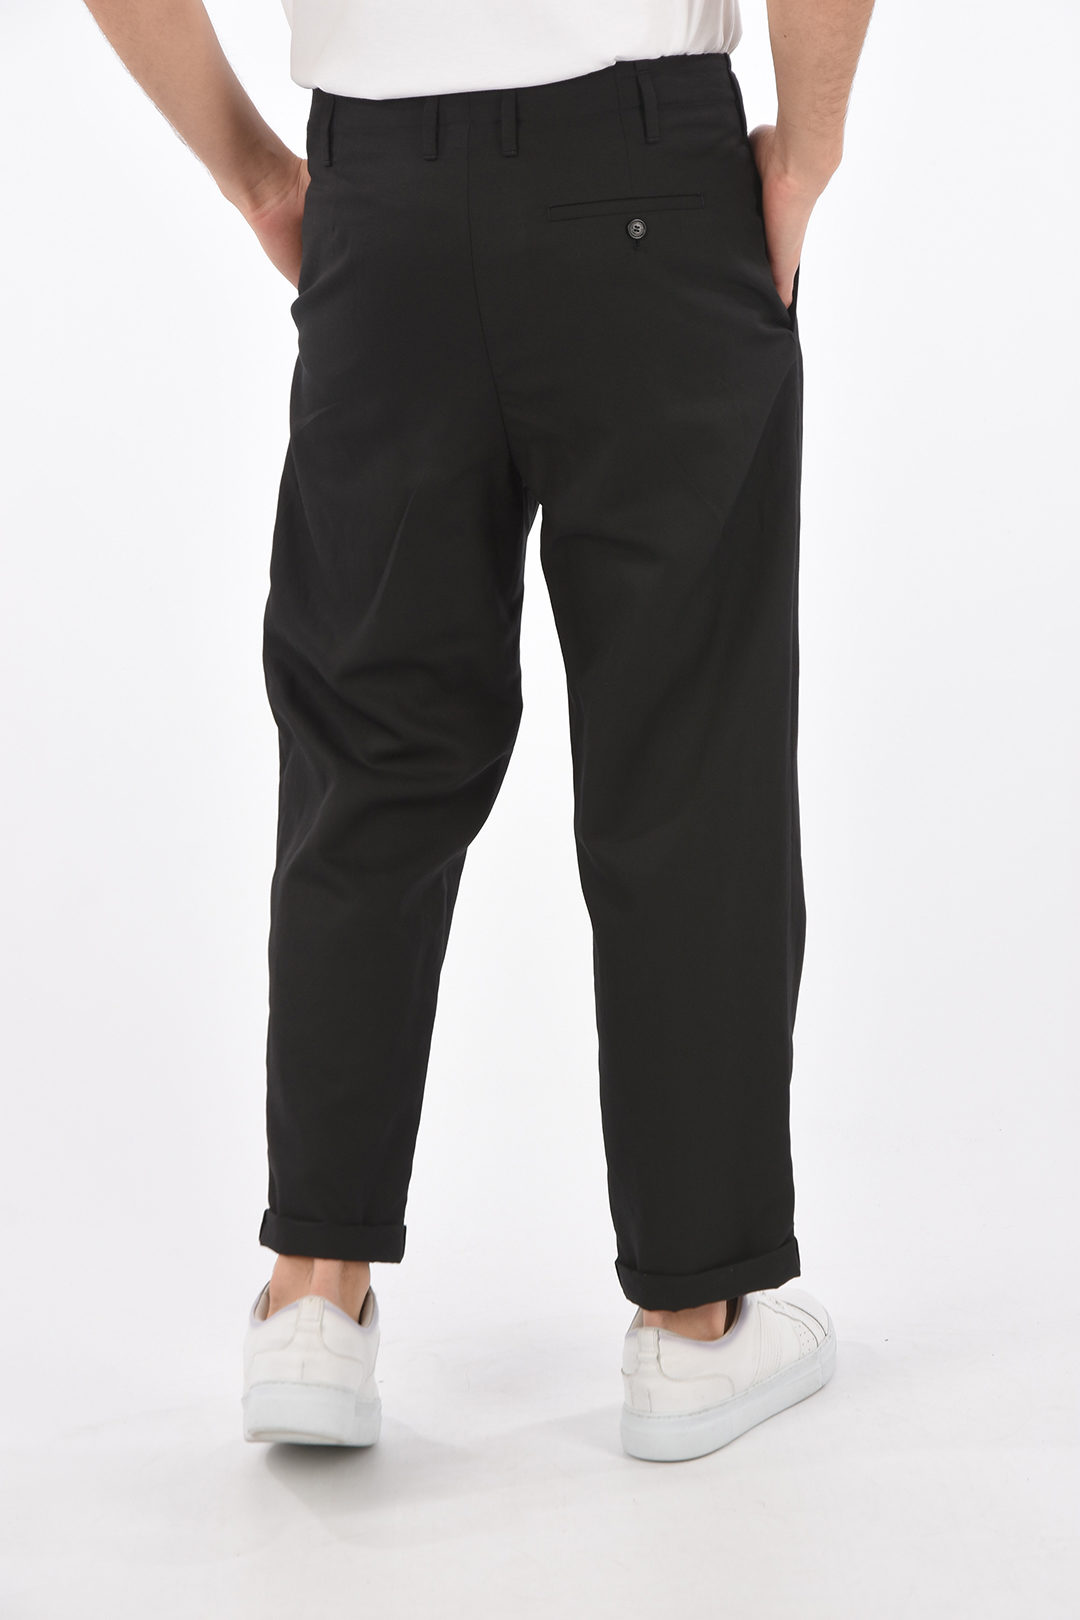 Neil Barrett Single-pleated Chino Pants with Low Rise men - Glamood Outlet